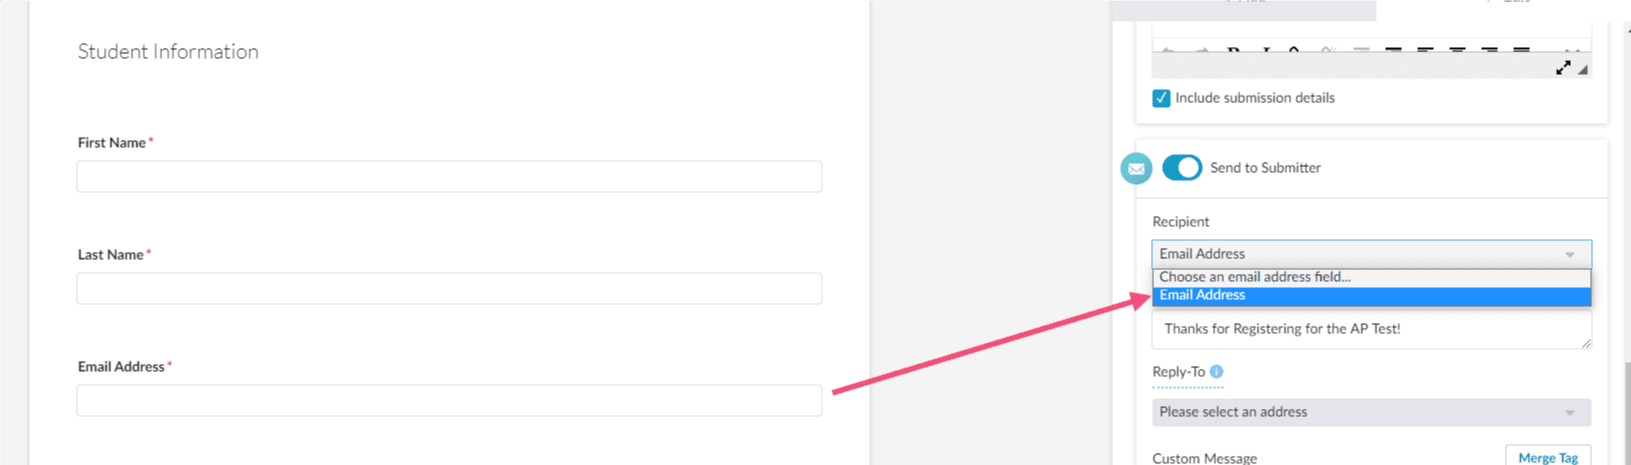 Recipient dropdown in Send to Submitter settings with email field pointed out